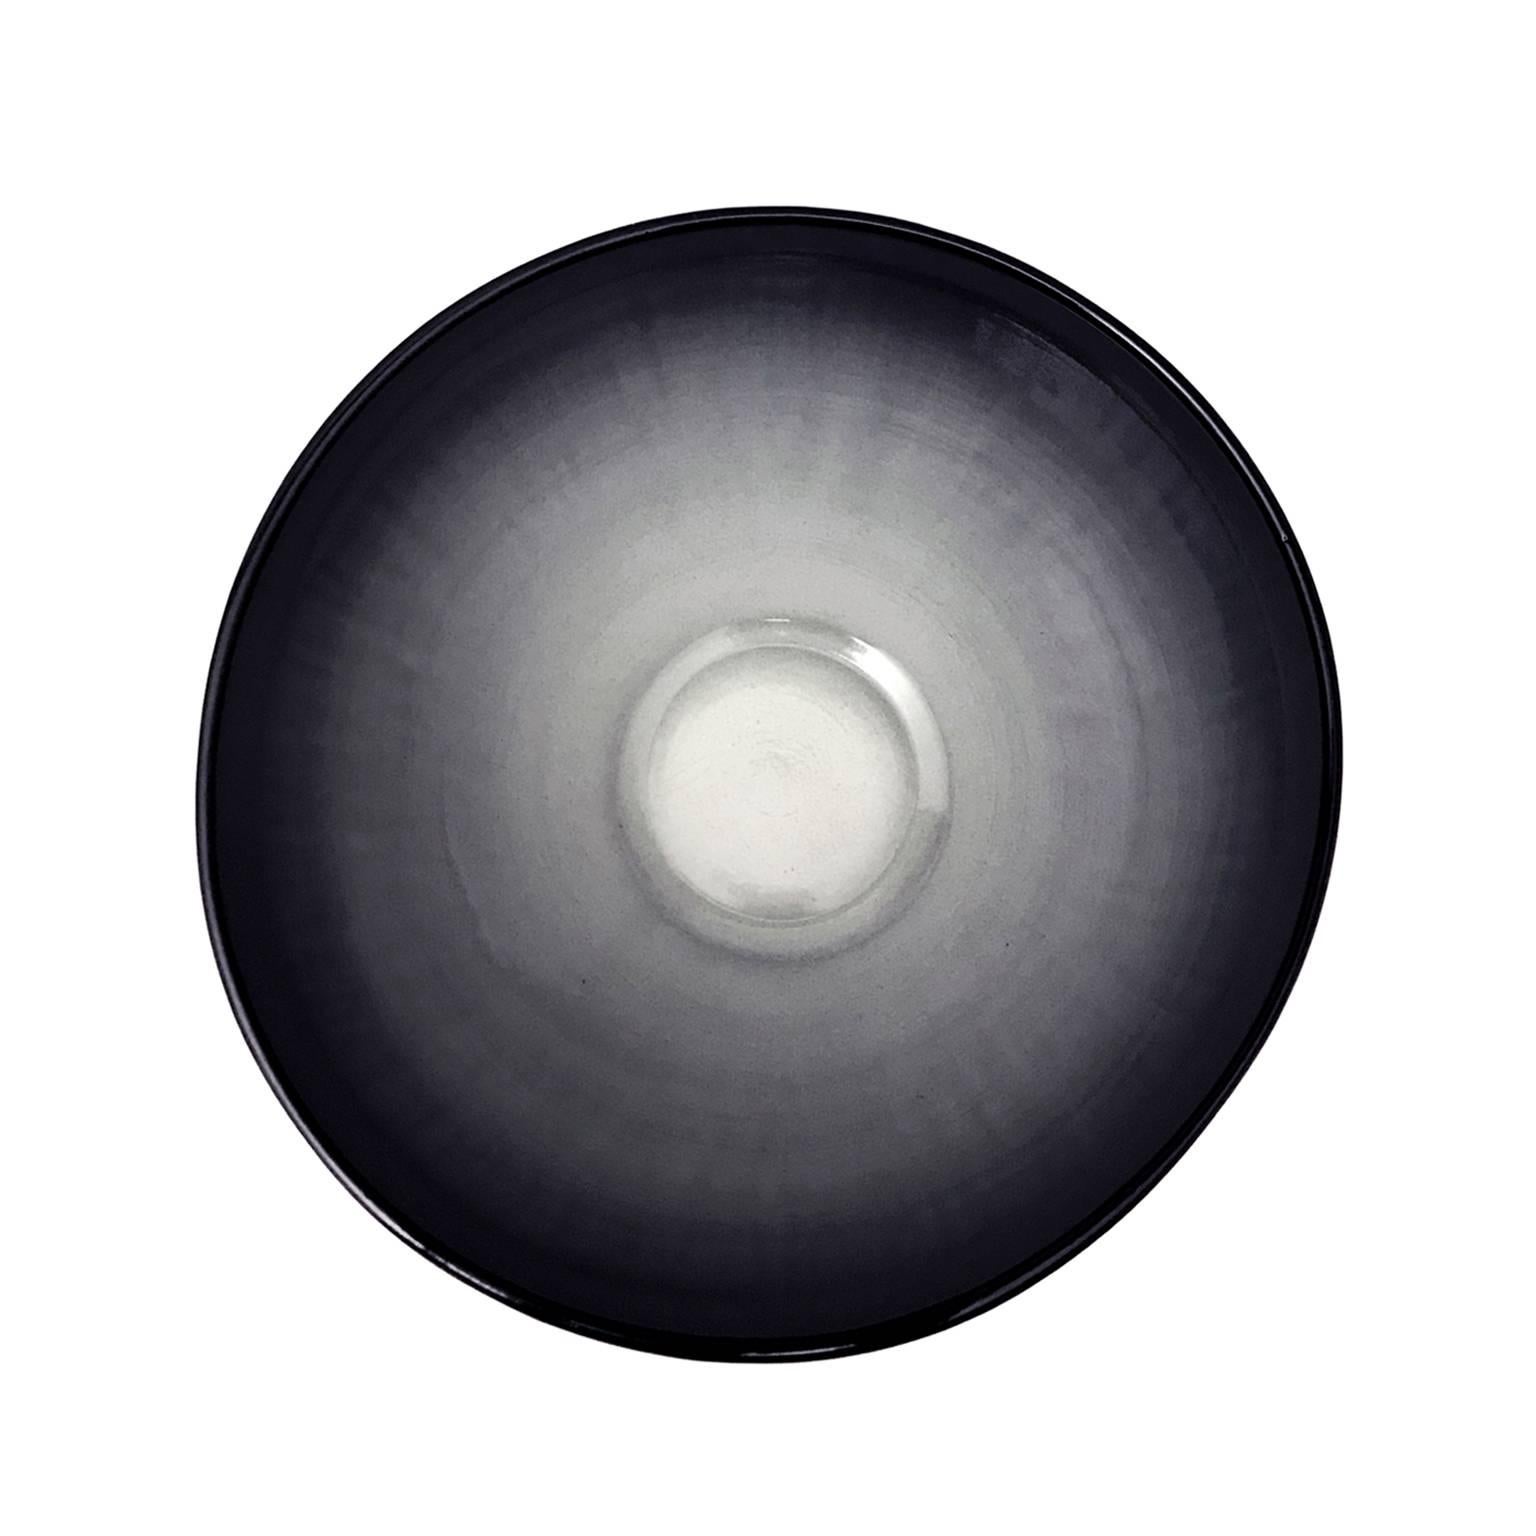 Large curved ceramic bowl with ombre glaze by Sandi Fellman. USA, 2018.

Veteran photographer Sandi Fellman's ceramic vessels are an exploration of a new medium. The forms, palettes, and sensuality of her photos can be found within each piece. The